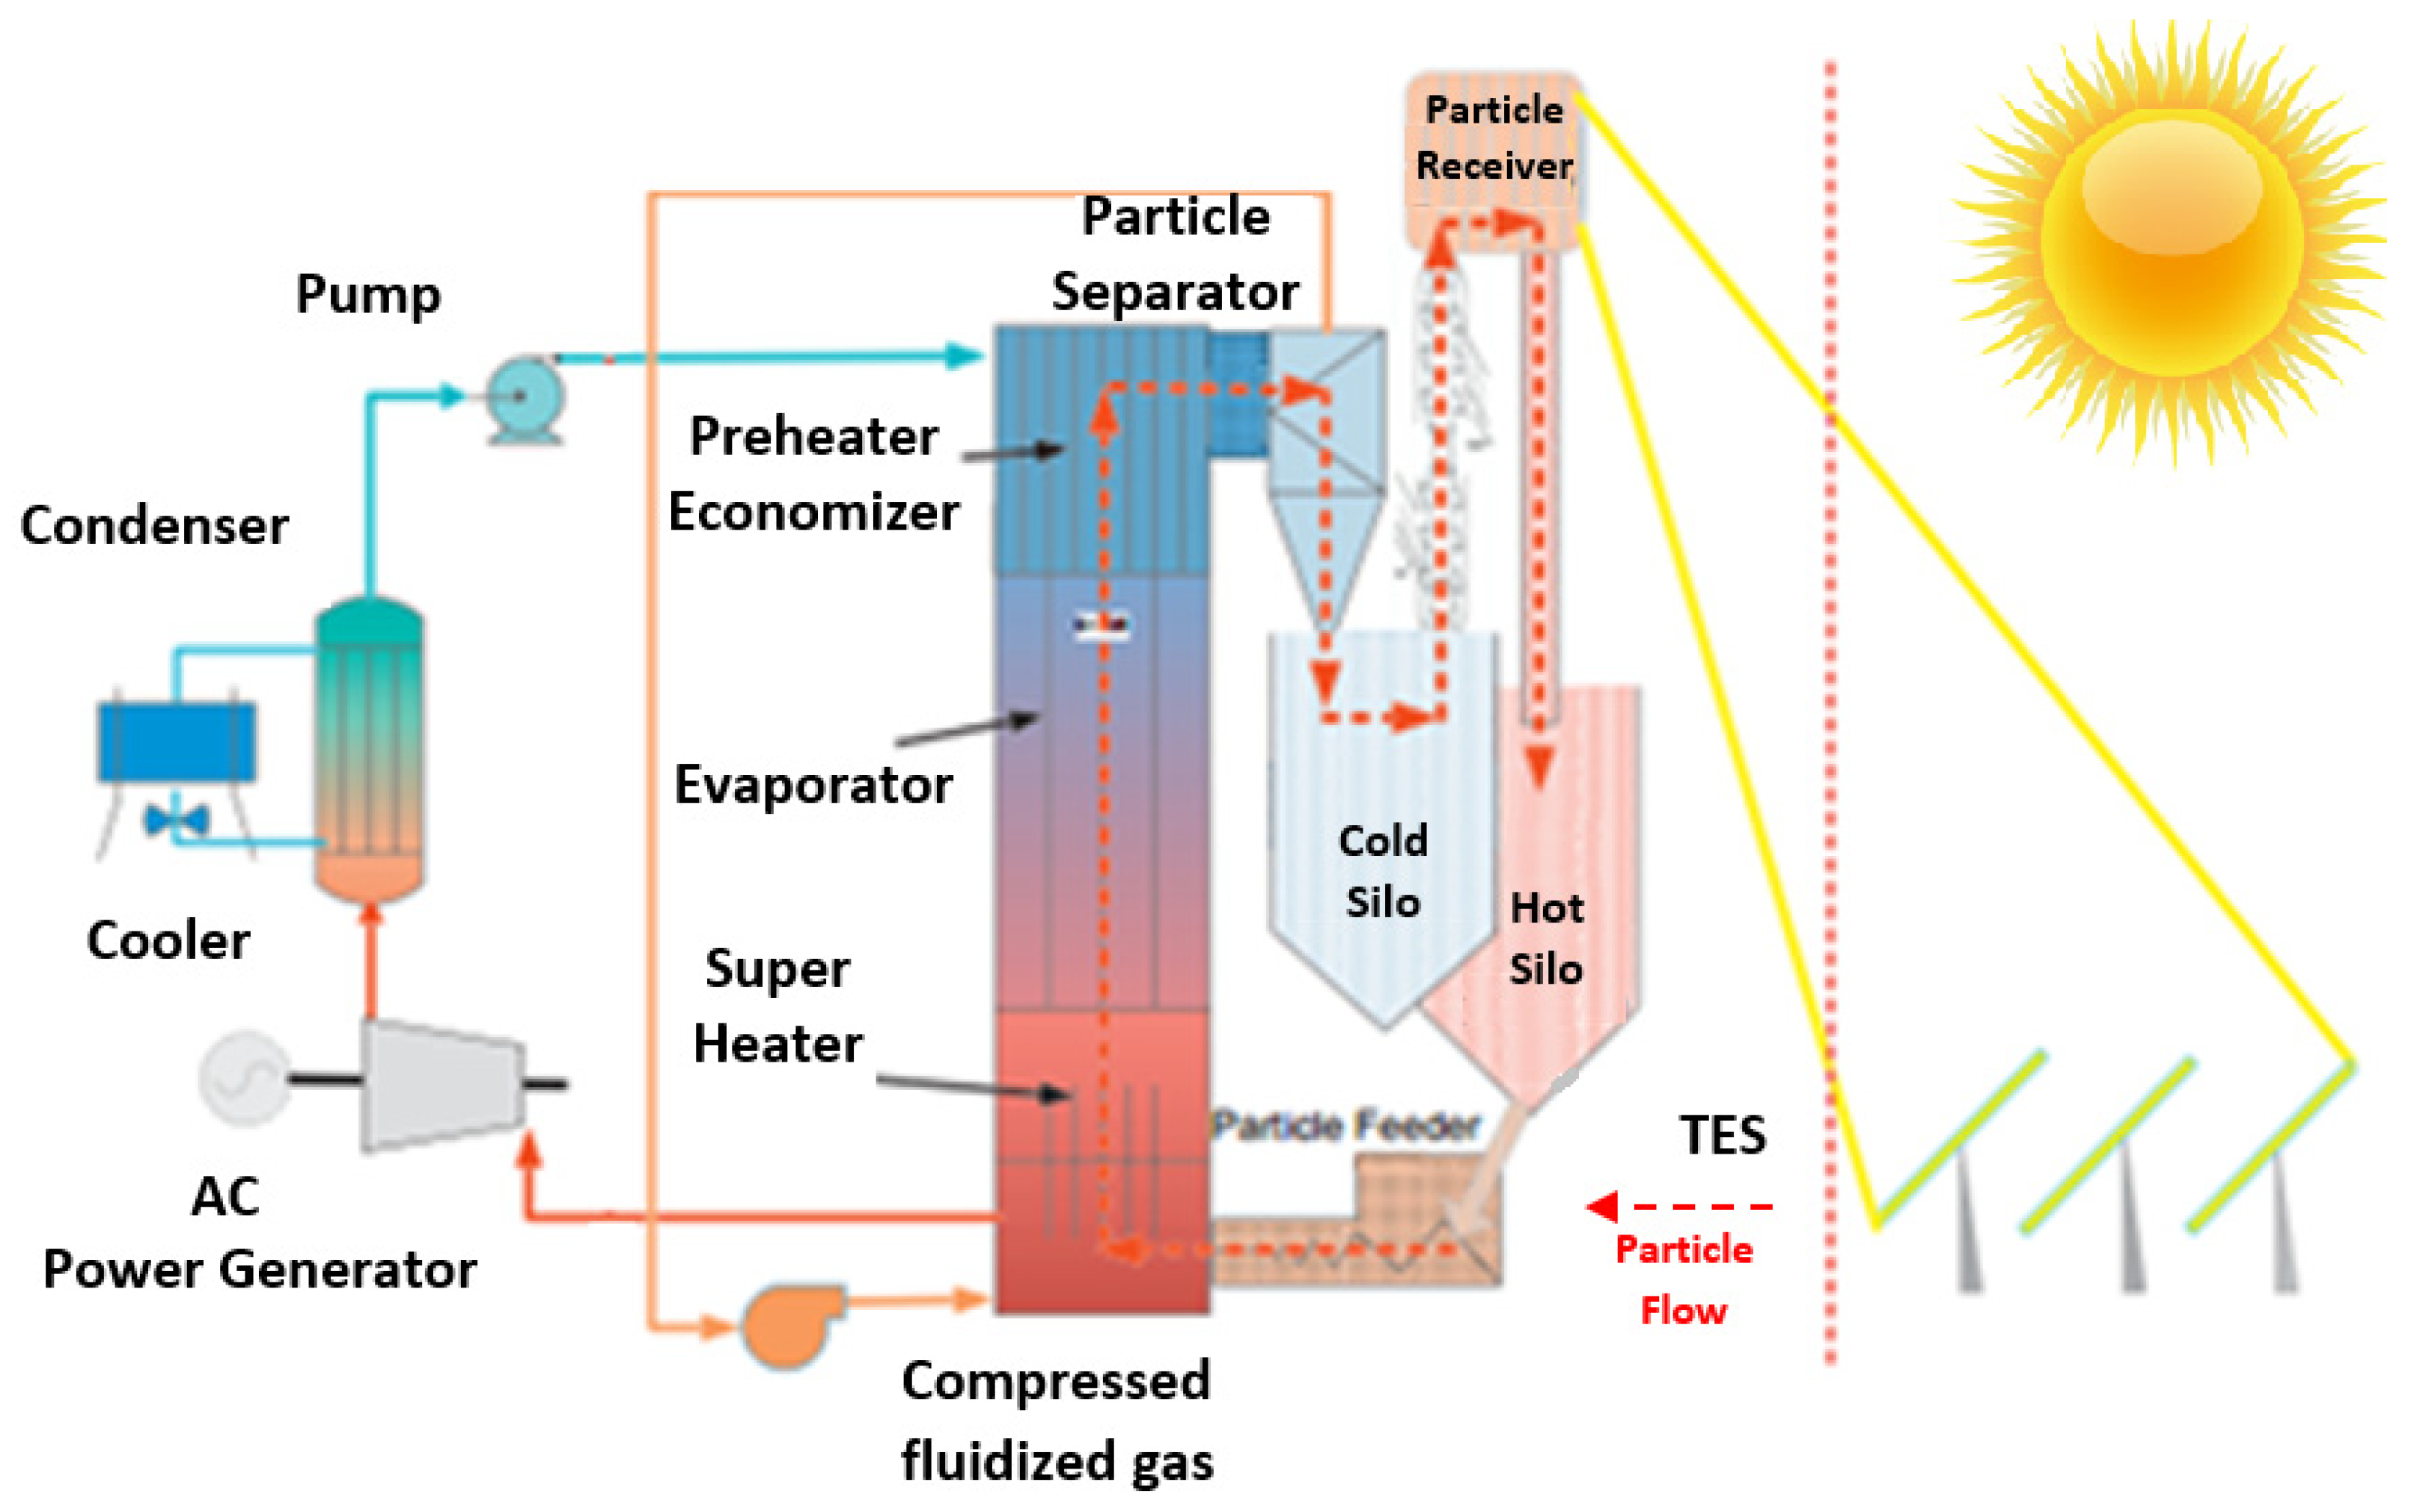 Machine Learning for Harnessing Thermal Energy: From Materials